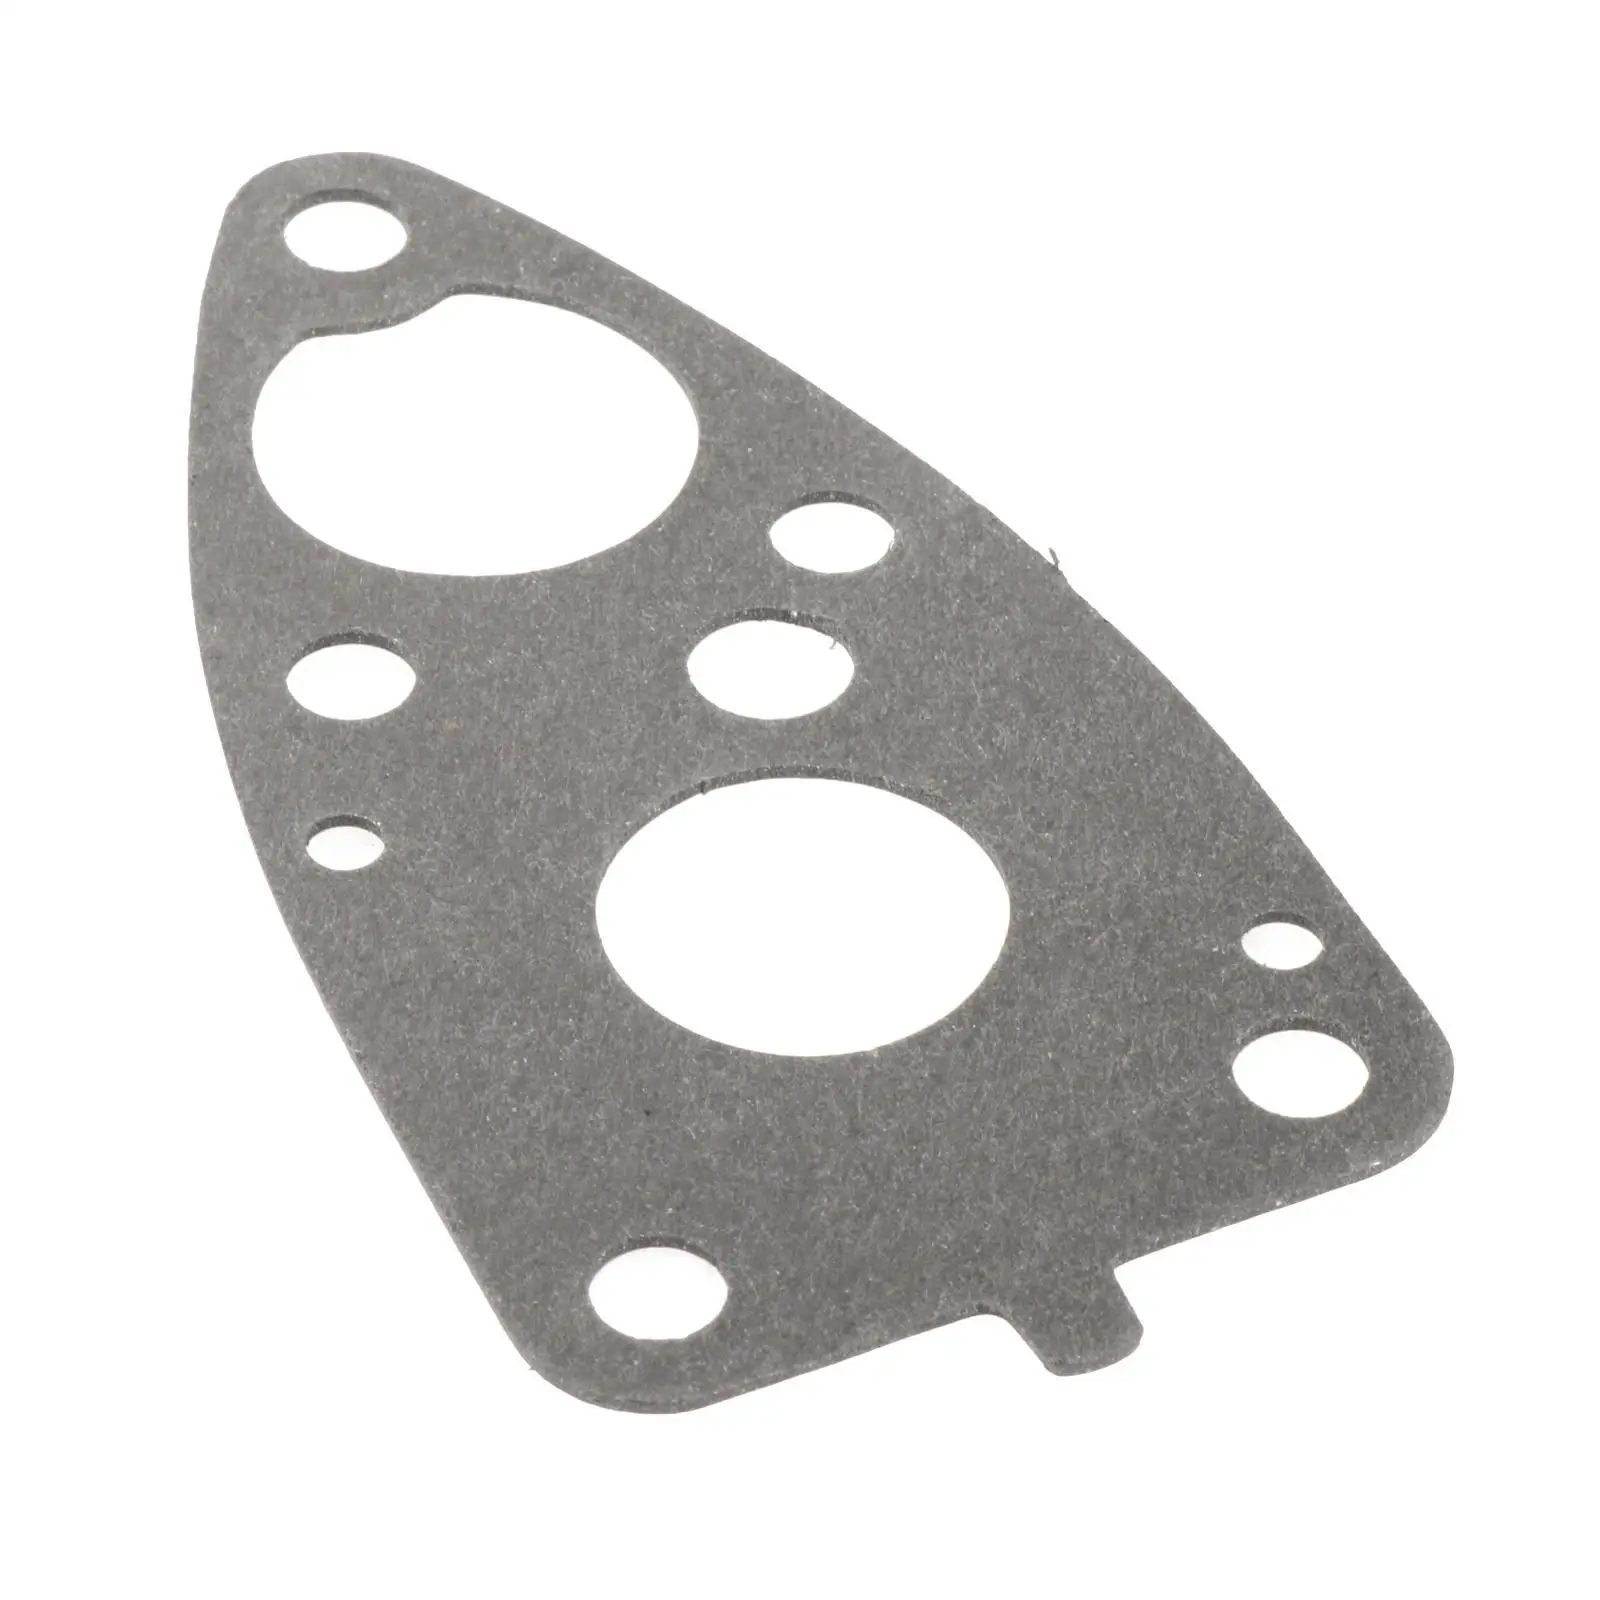 Lower Gear Case Plate Gasket Parts Fit for 4A 4B 5C 6E0-45315-A0